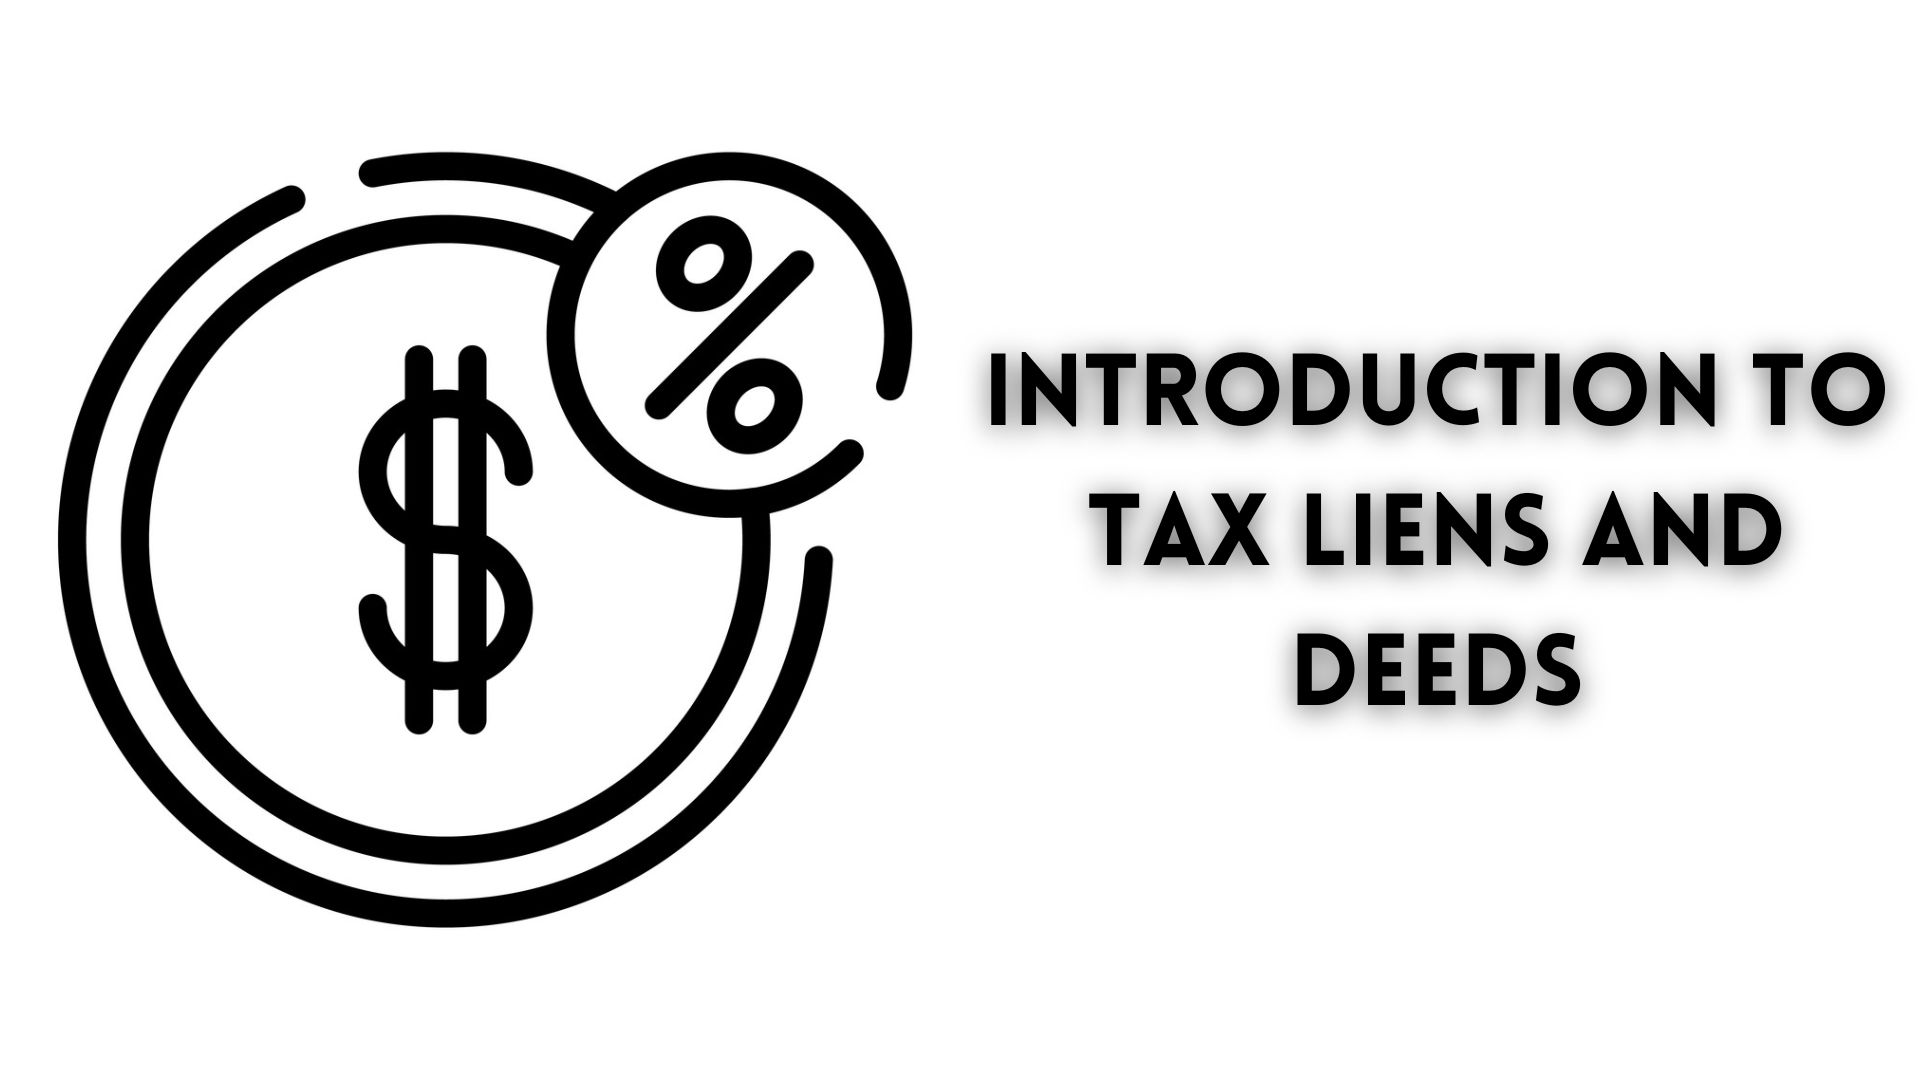 Introduction to Tax Liens and Deeds.